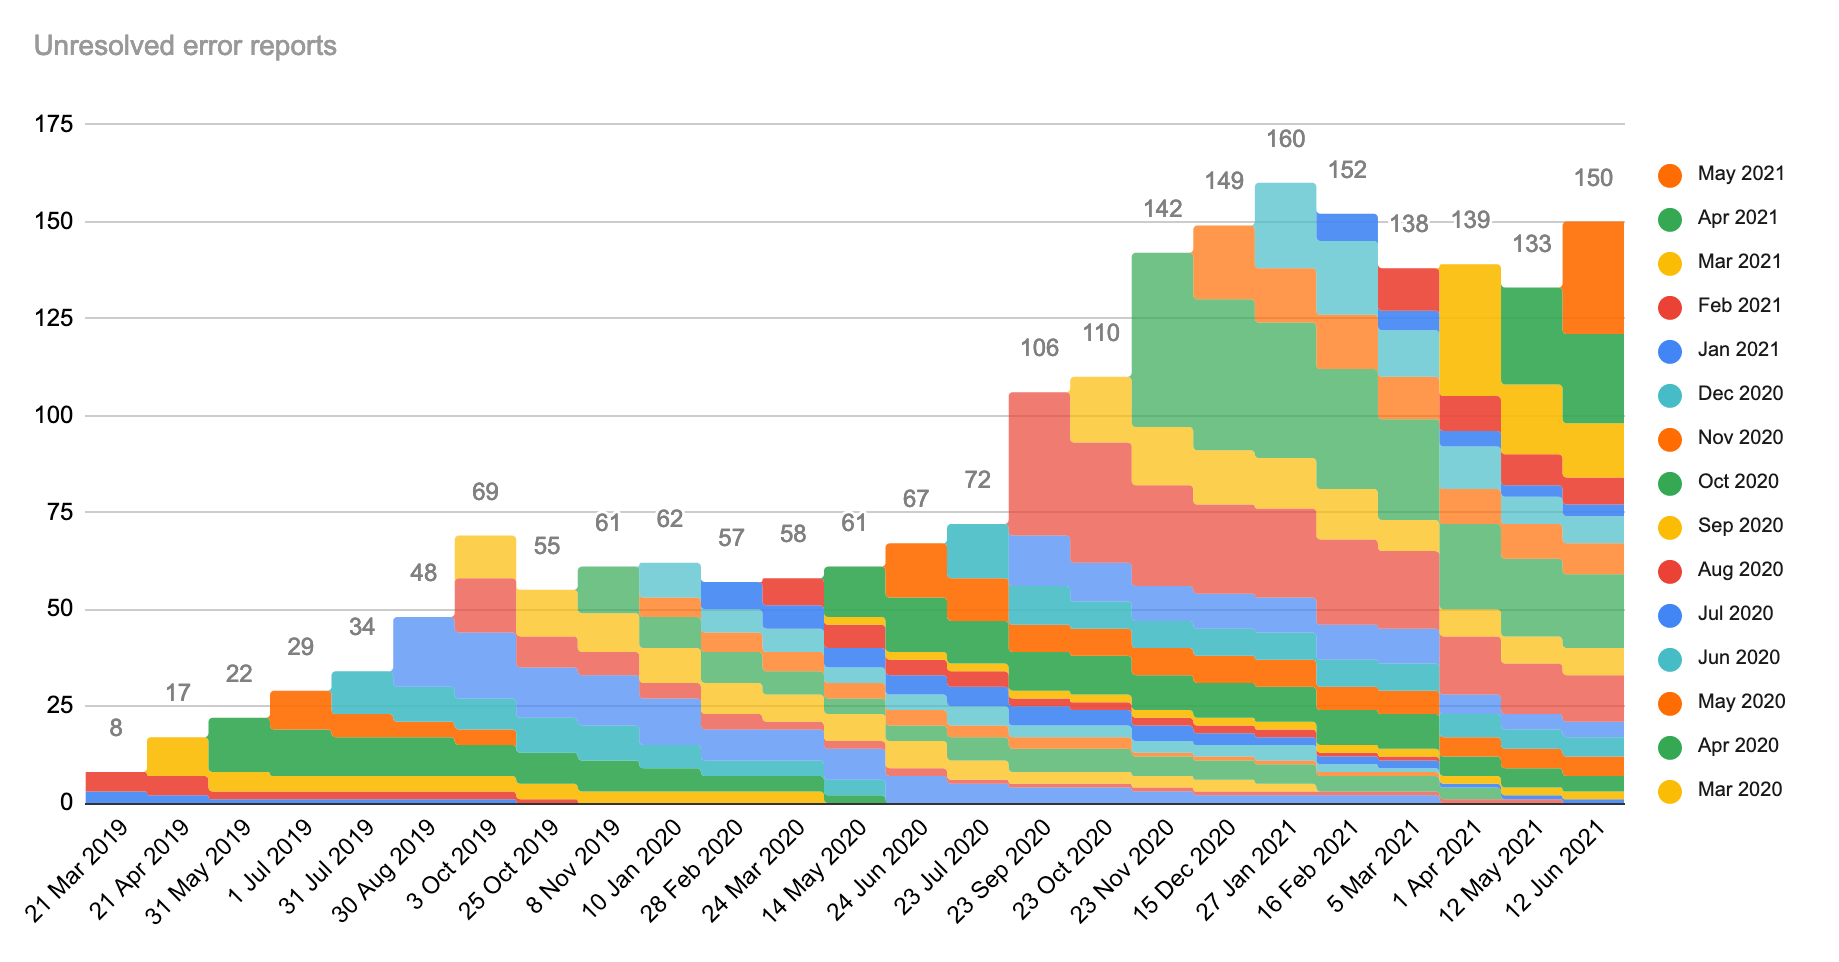 Unresolved error reports, stacked by month.